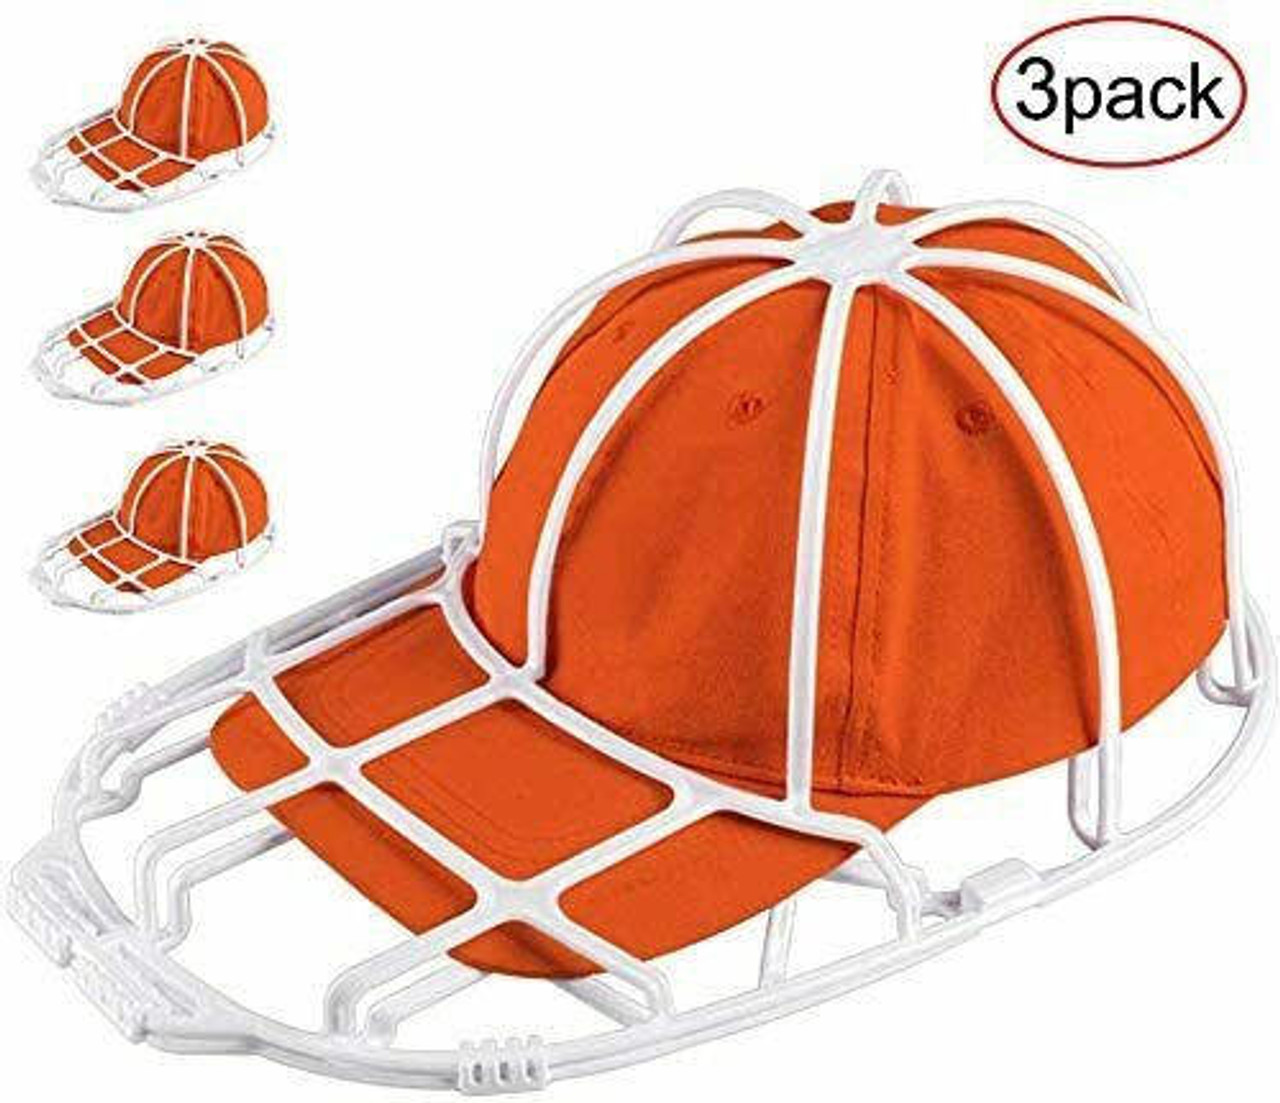 BallcapBuddy Cap Washer Hat Washer The Original Patented Baseball Cap  Cleaner Frame/Cage/Protector Excellent Ball Cap Washer for Flat and Curved  caps